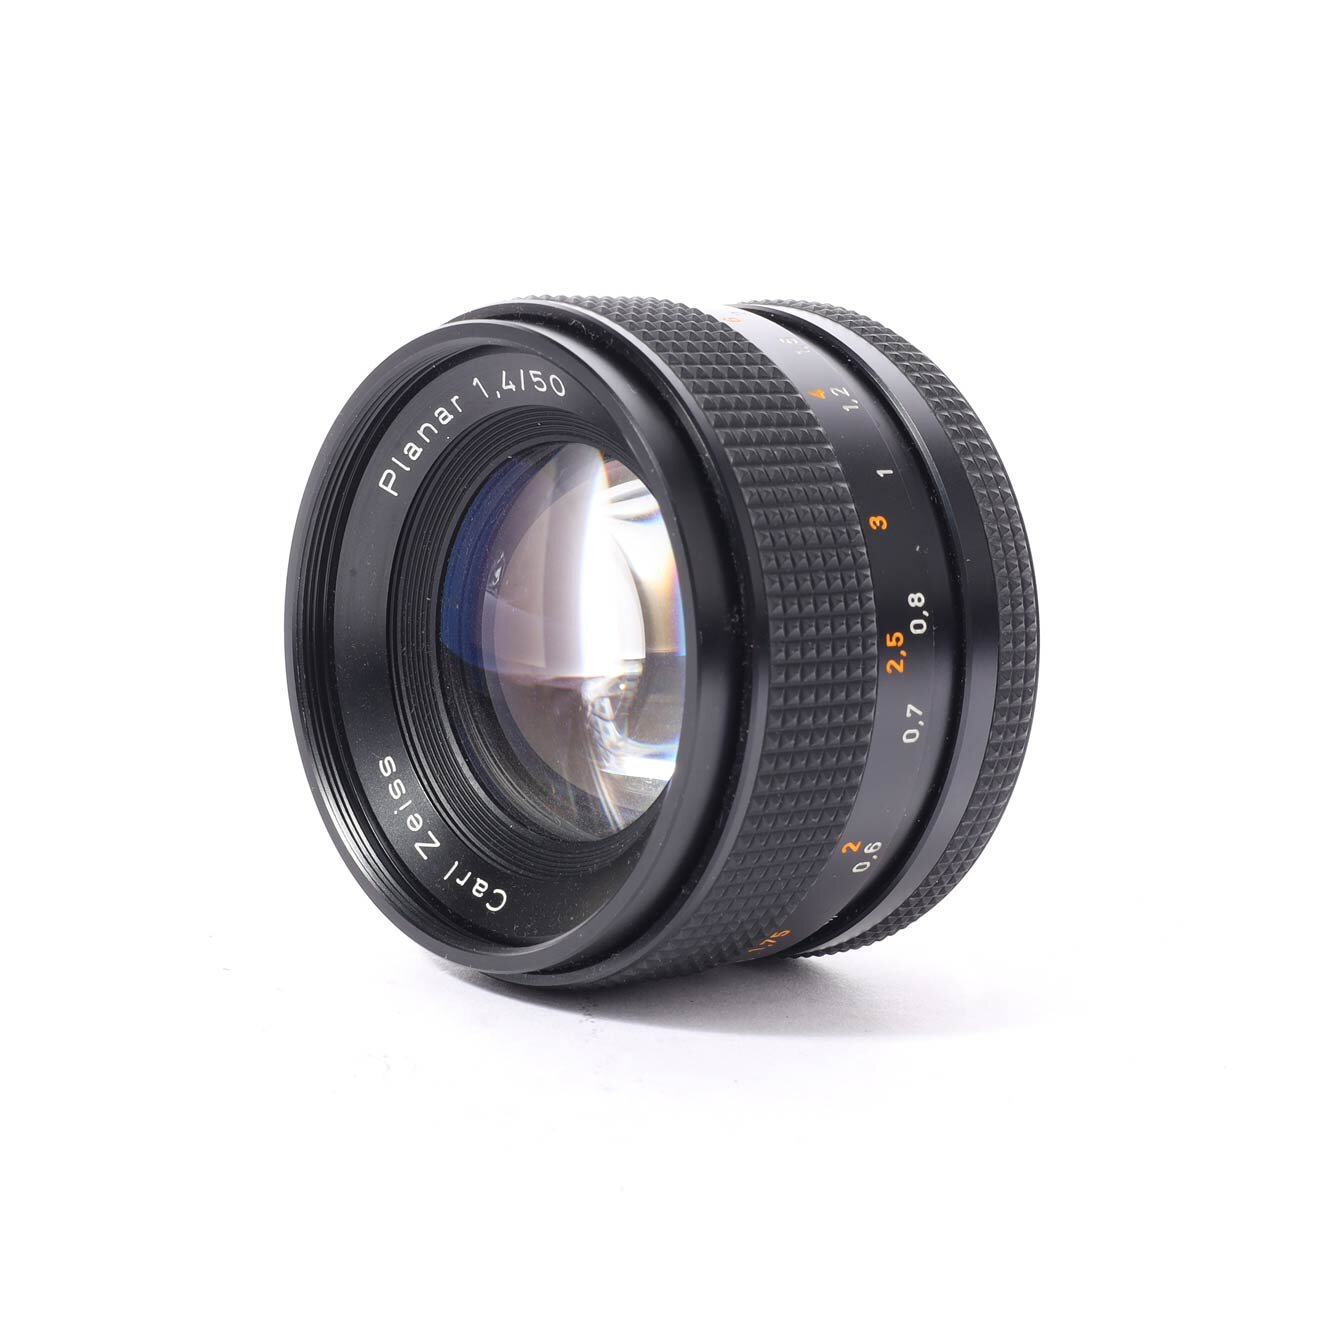 Carl Zeiss Planar 1,4/50 T* RTS